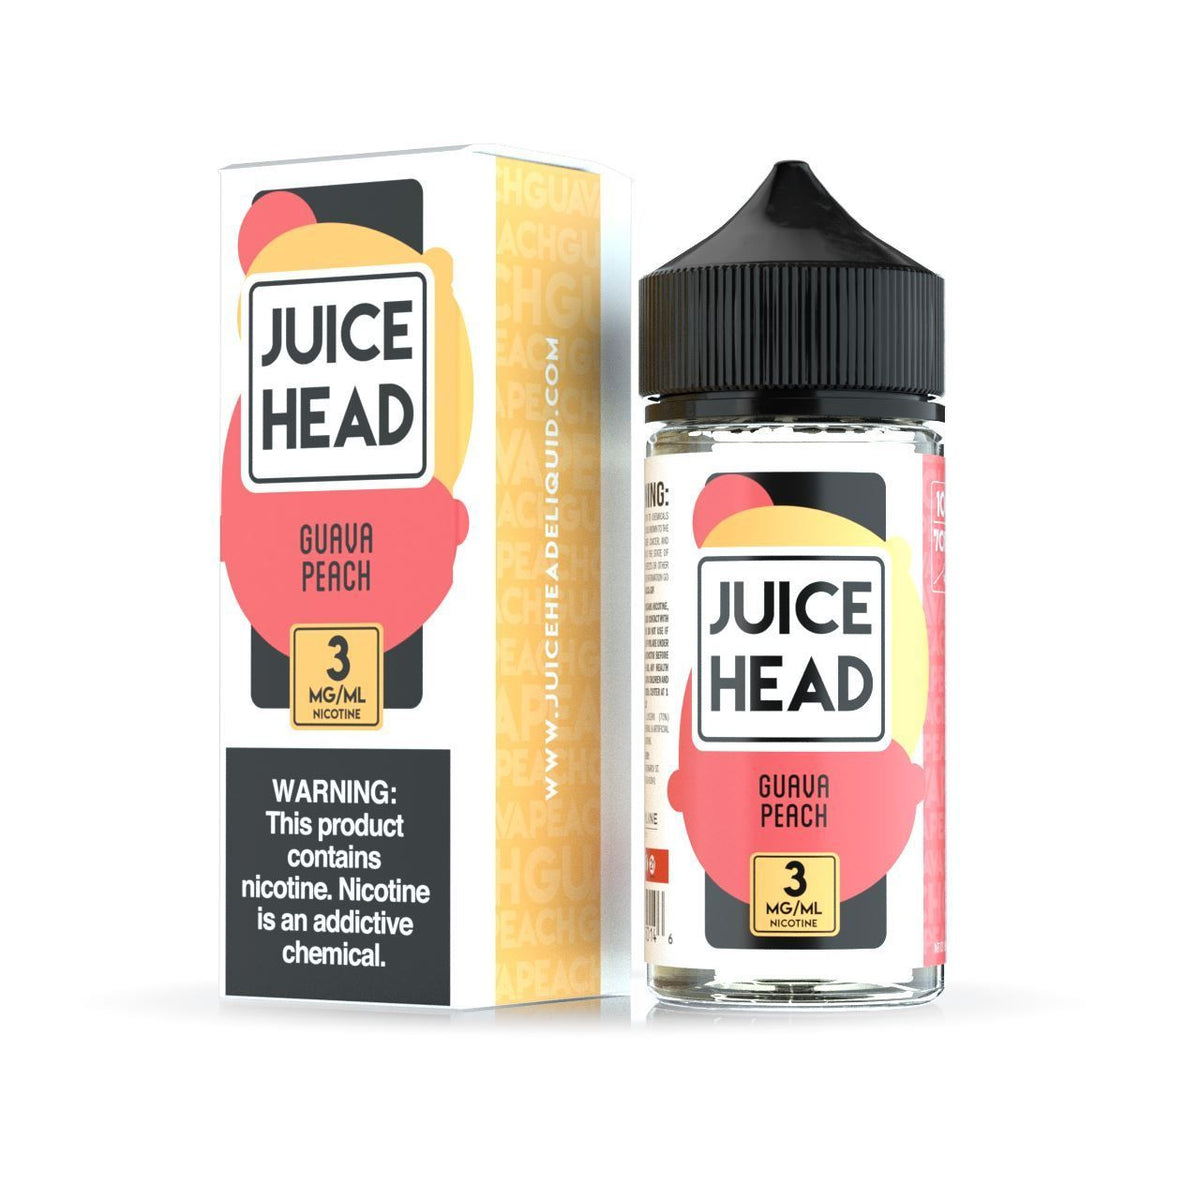 Guava Peach by Juice Head Series 100ml with Packaging